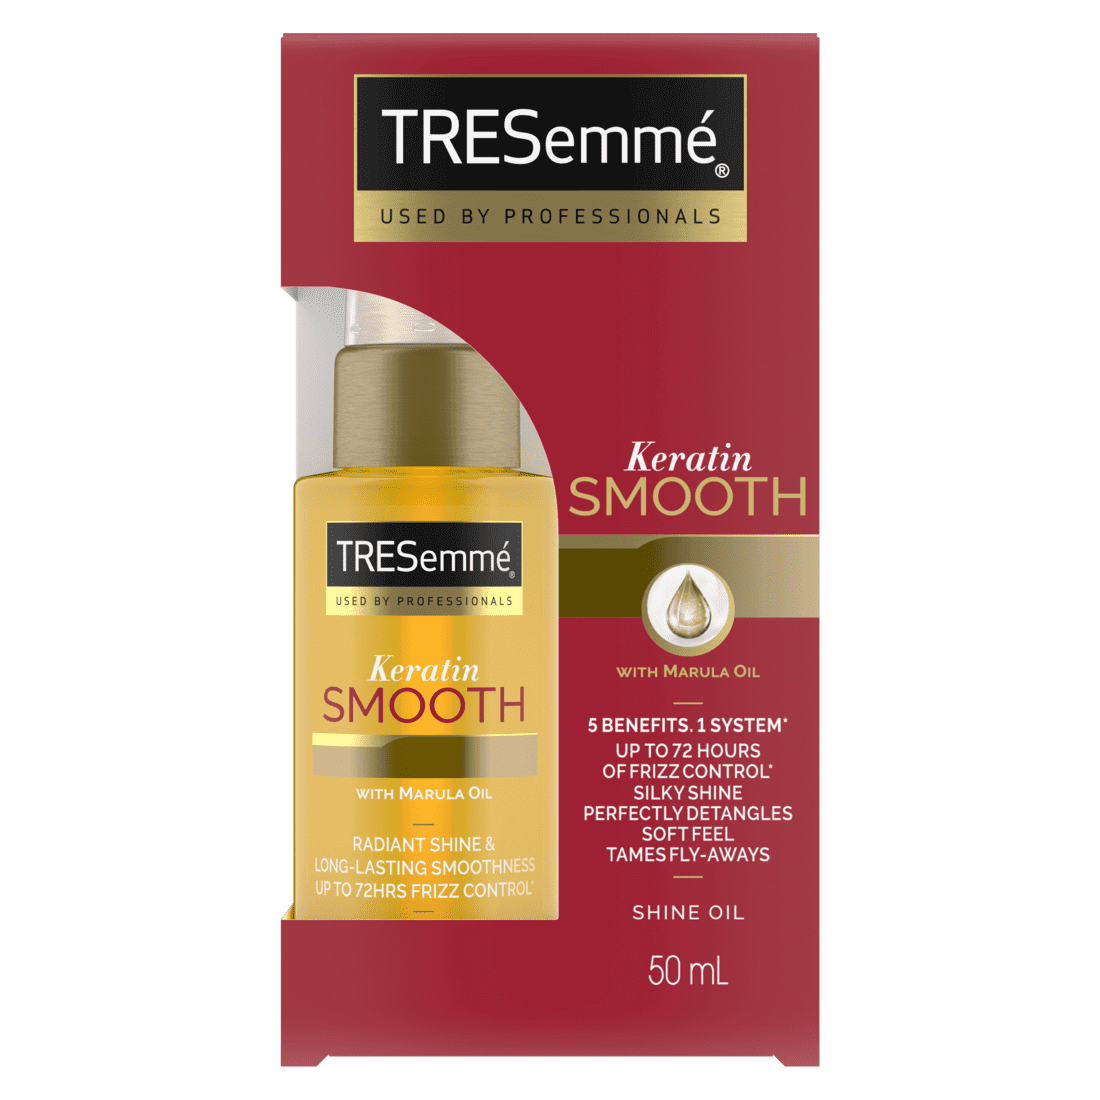 A 50ml bottle of TRESemmé Keratin Smooth Shine Oil front of pack image